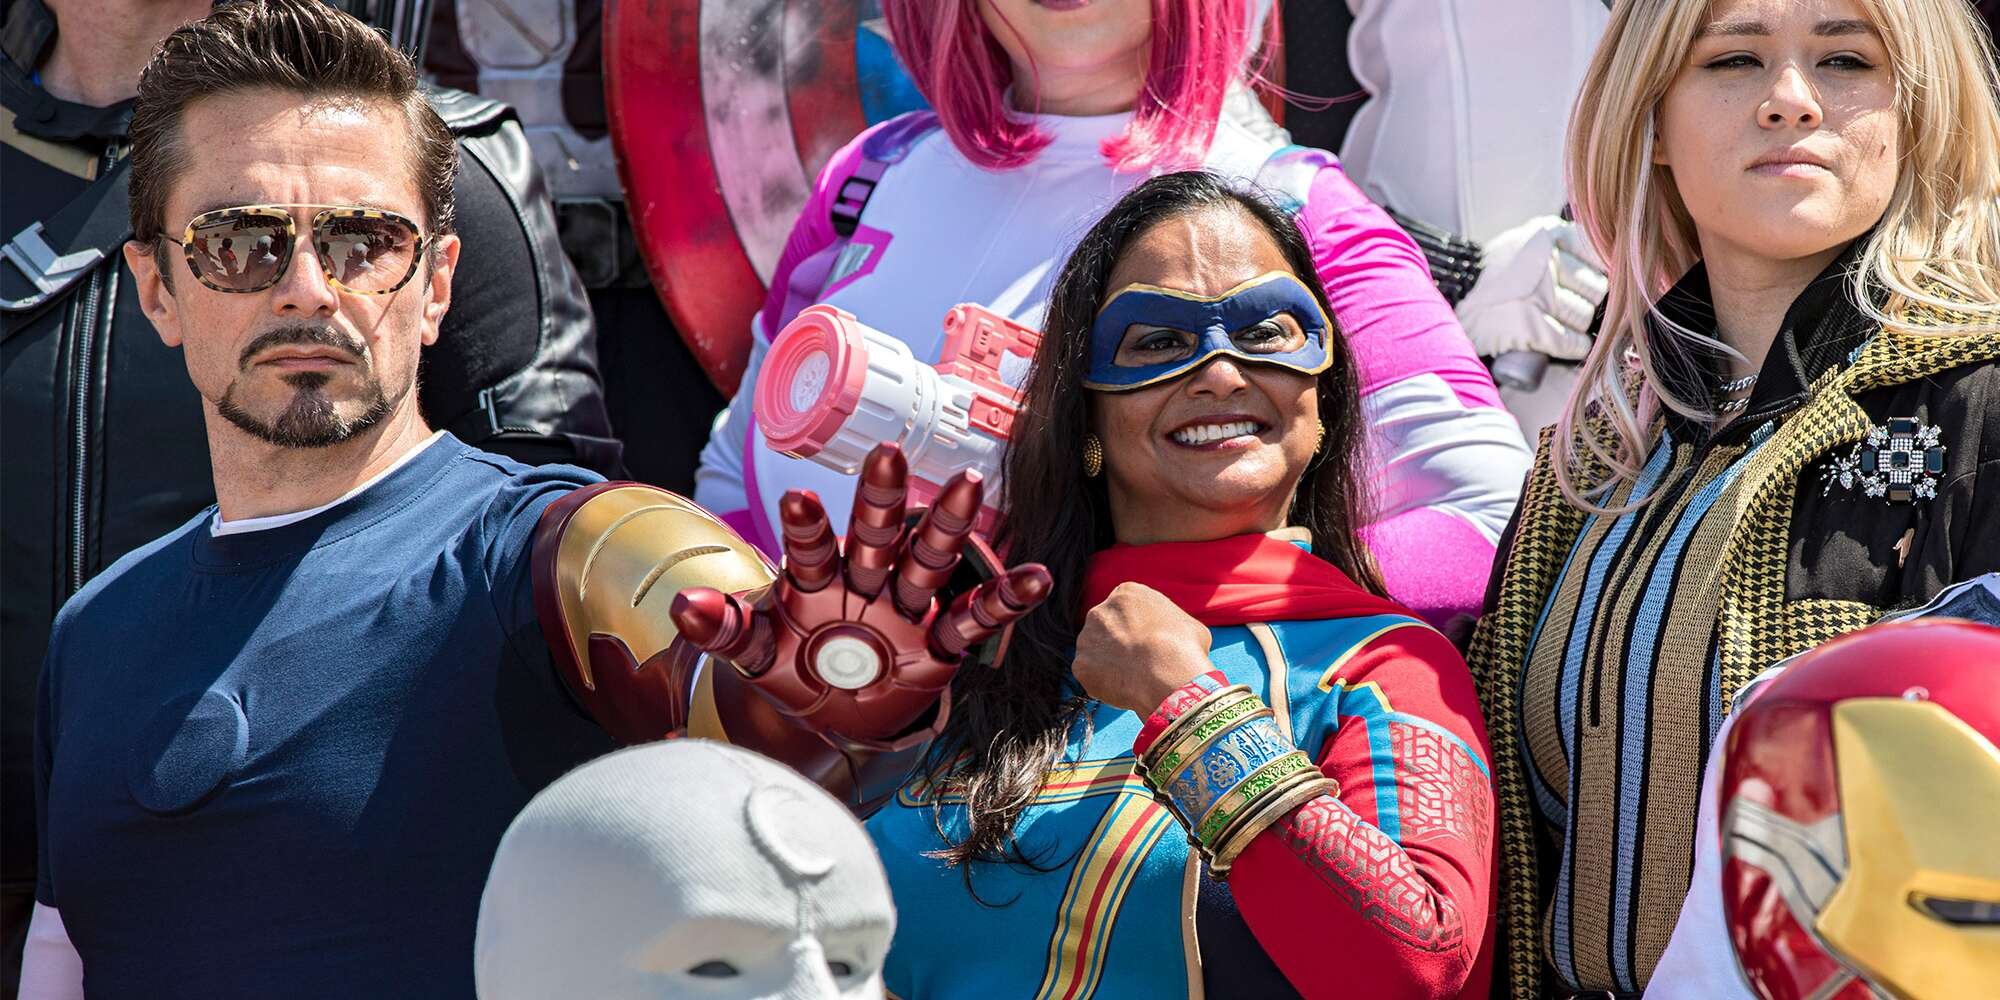 See the best cosplayers at 2022 Comic-Con, from The Sandman, The Boys, and more